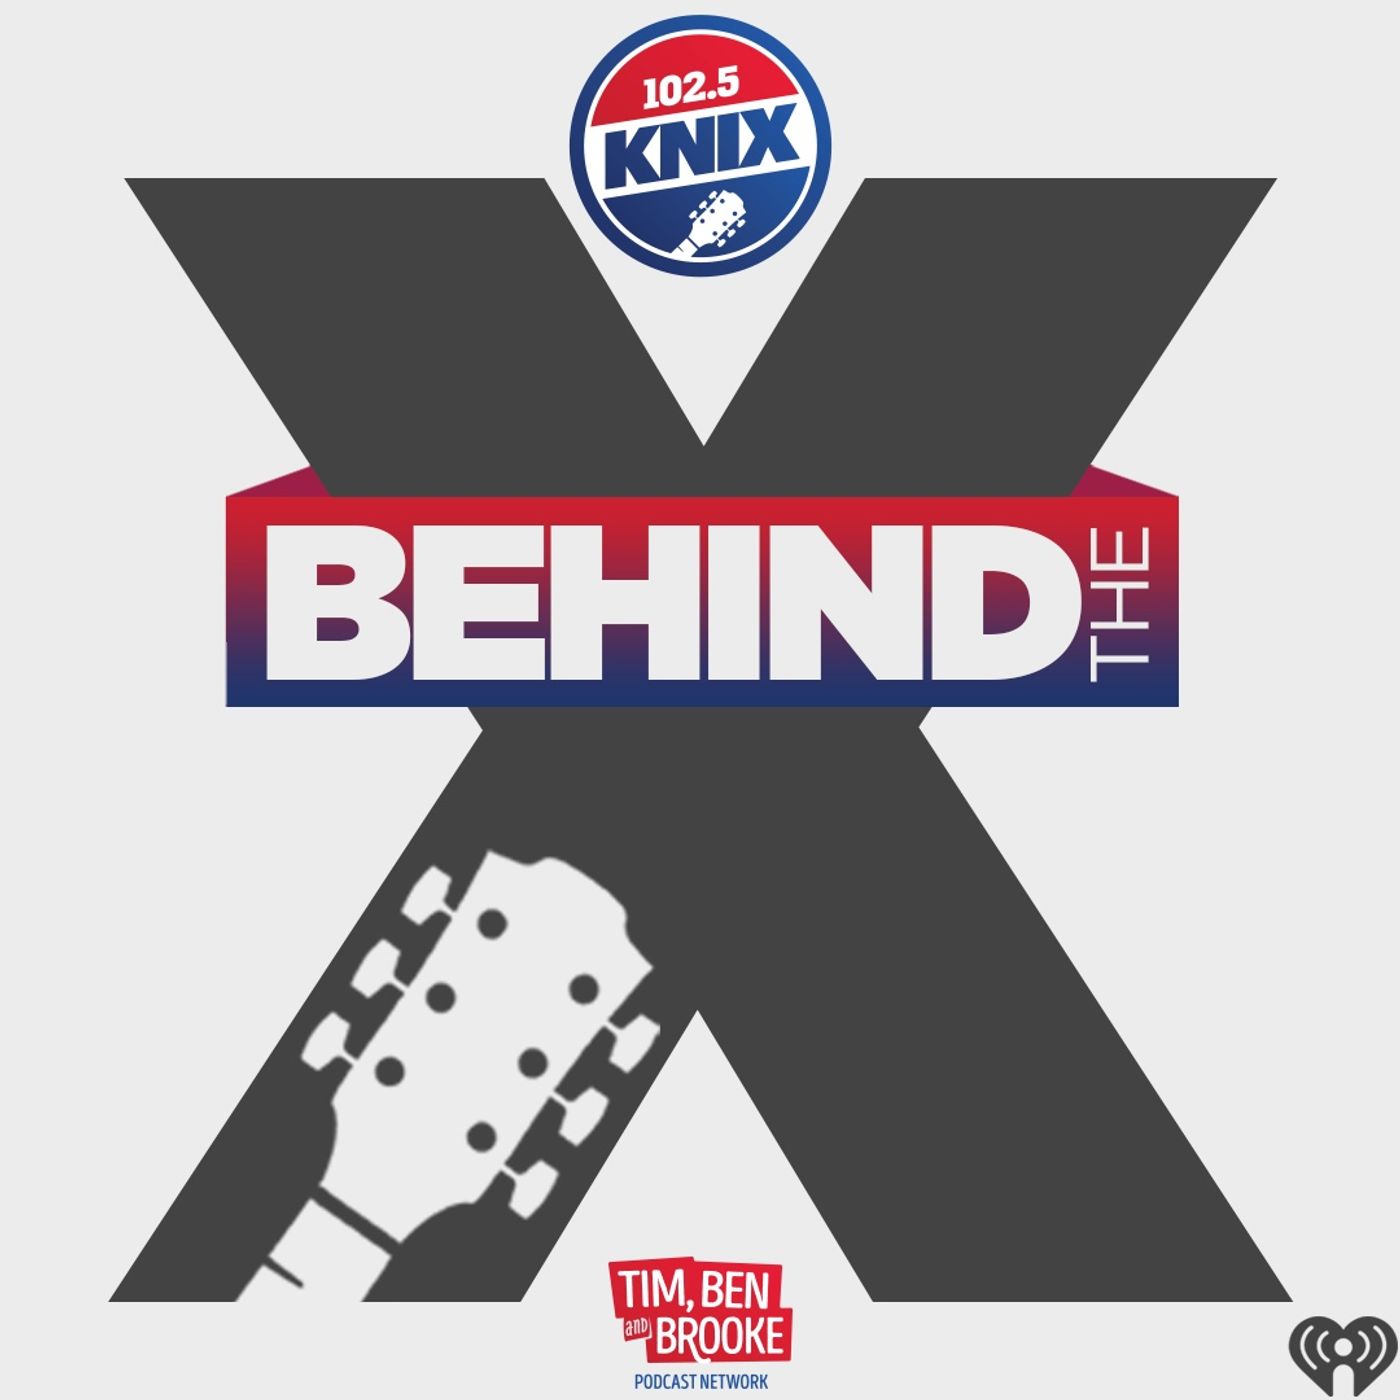 KNIX Country 102.5  Win tickets to the KNIX Secret Show at The